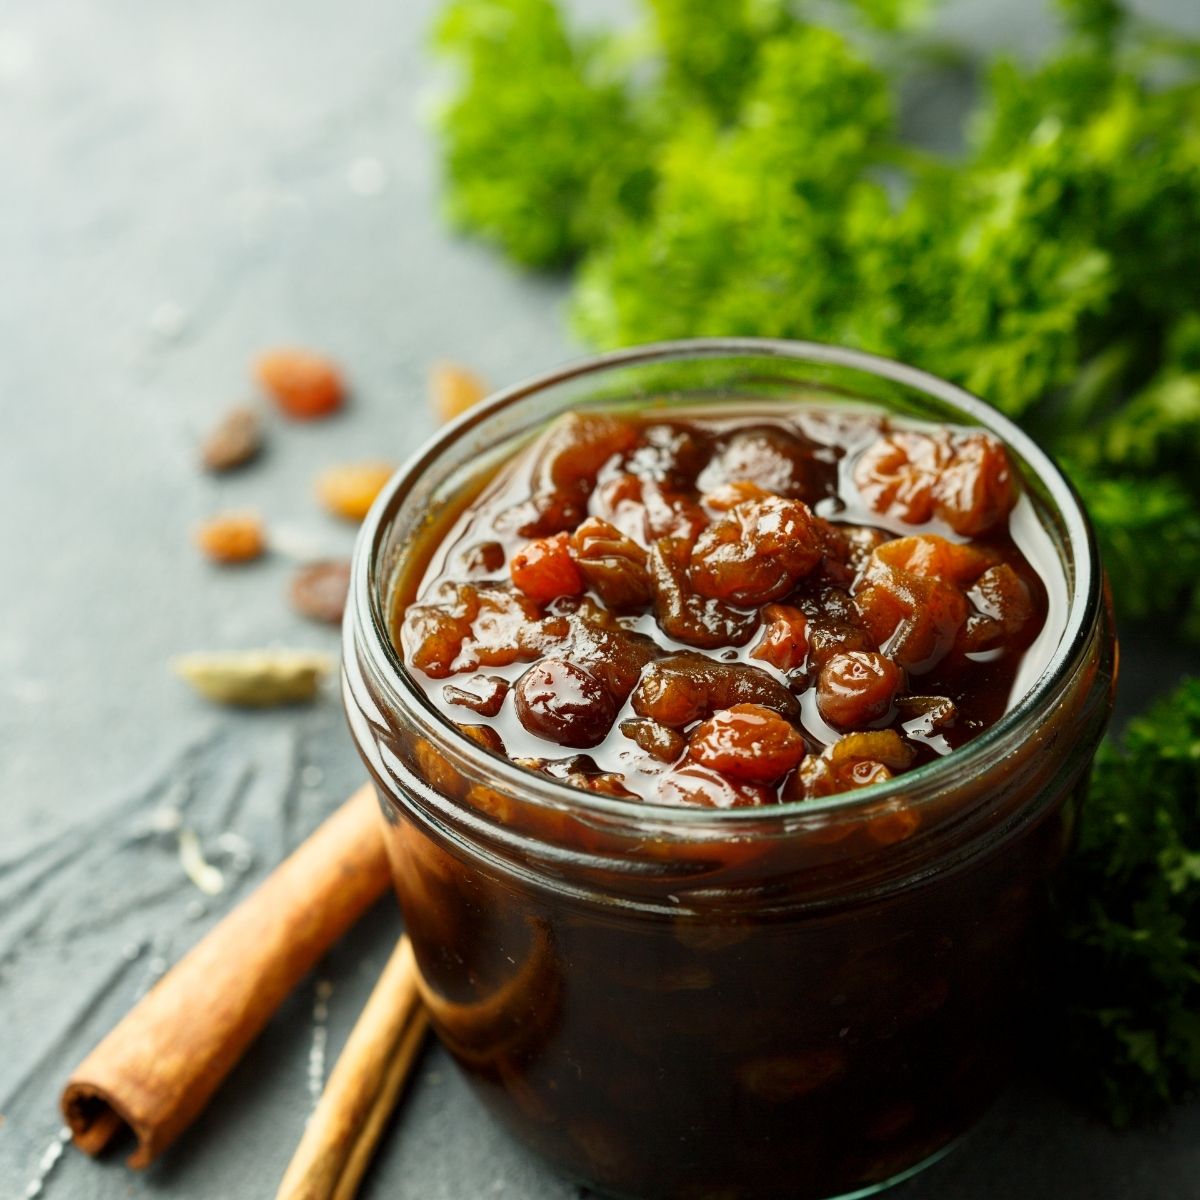 Stock up your kitchen with some chutney